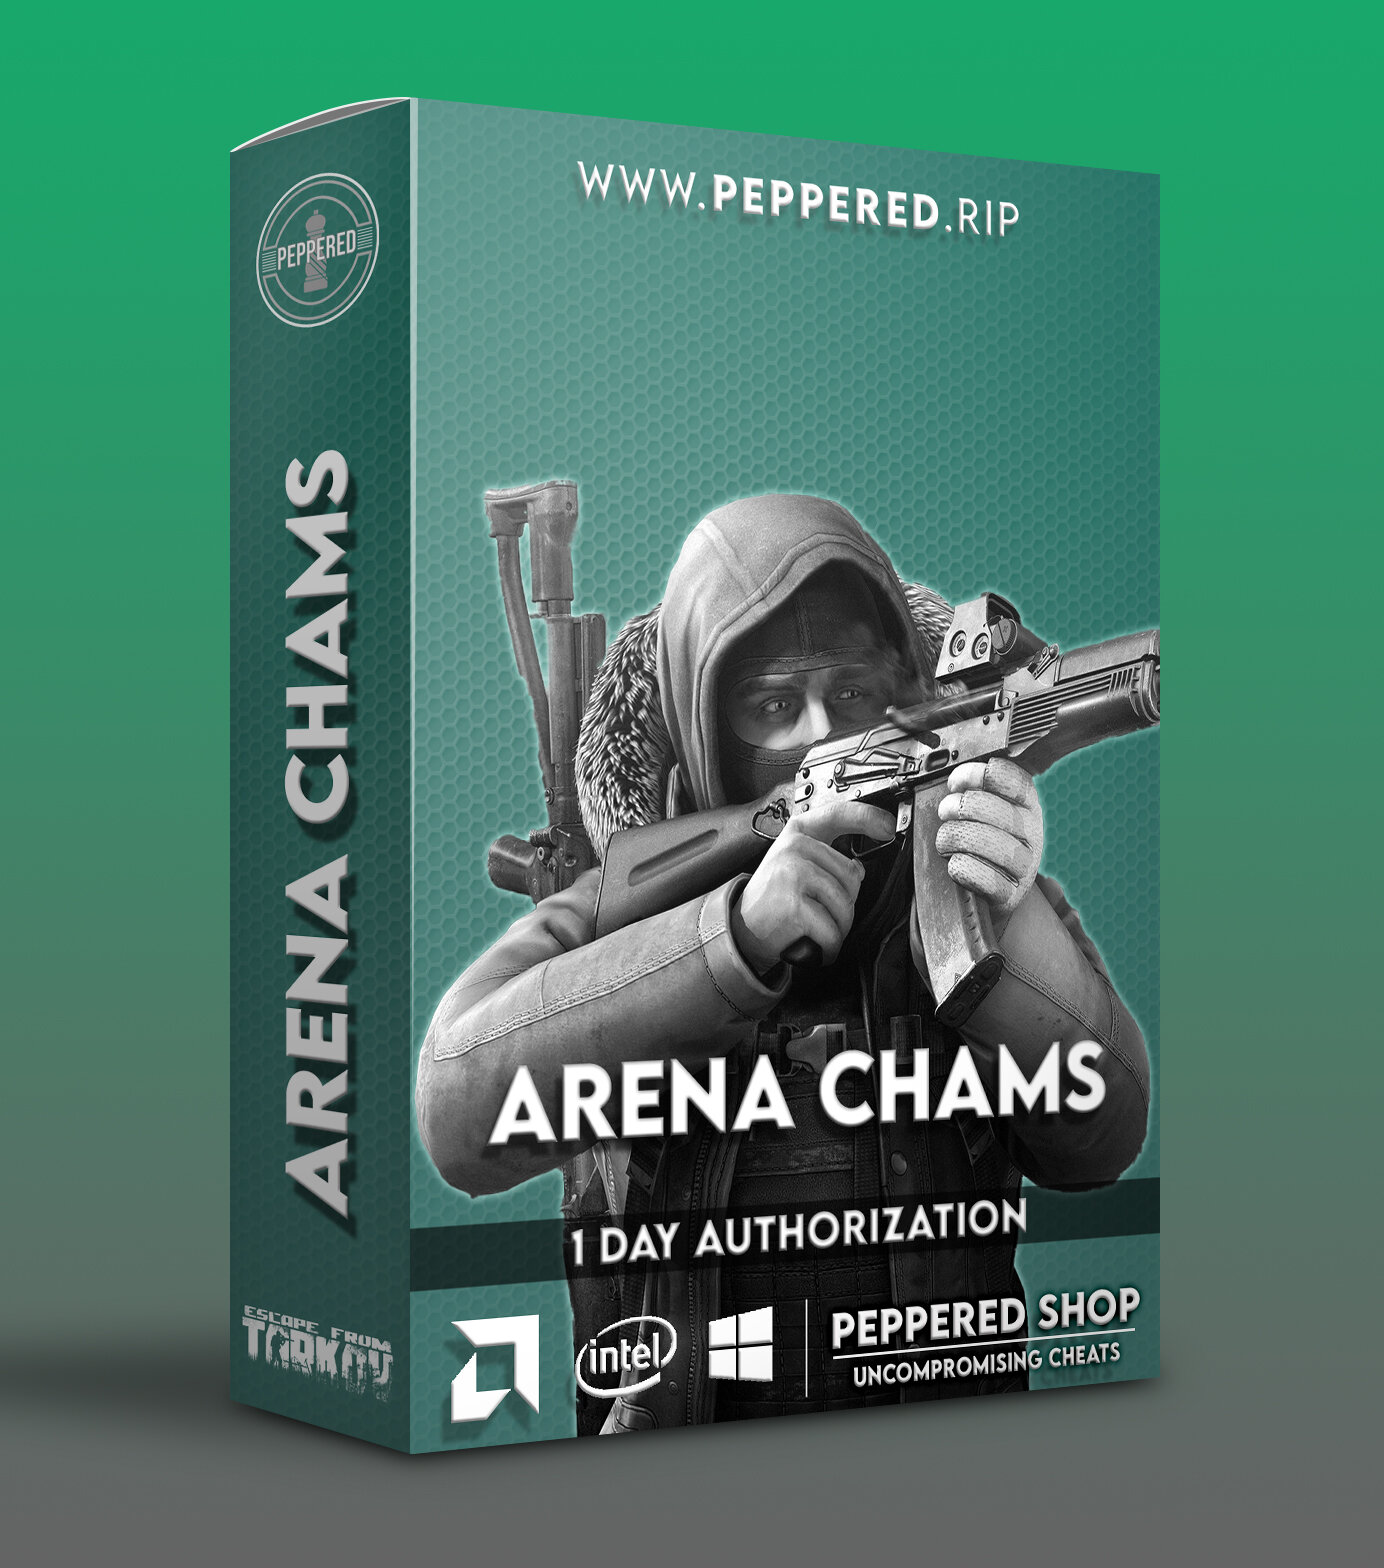 ARENA CHAMS 1 DAY